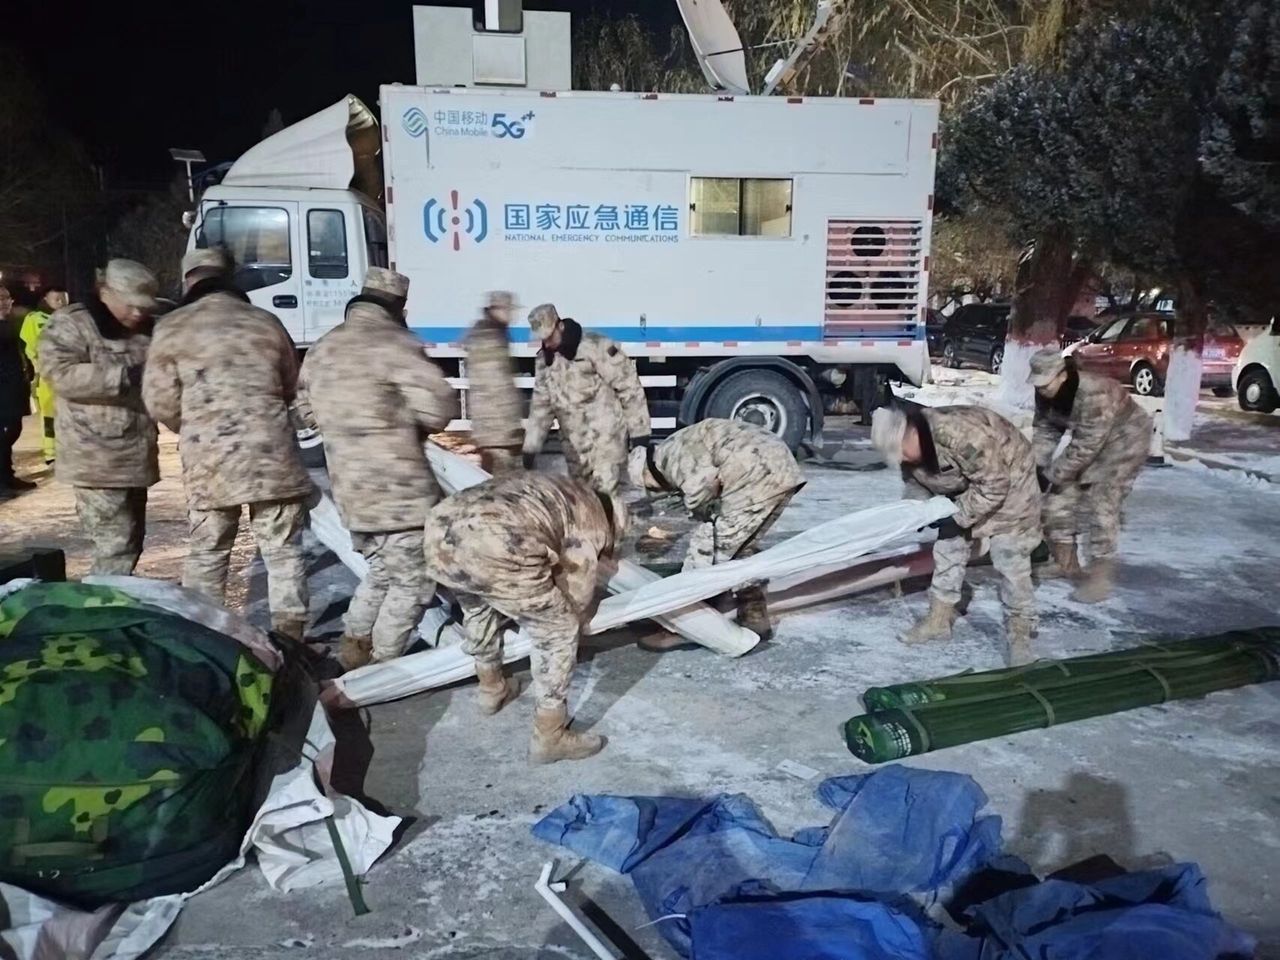 Rescuers set up tents in Yamansu Township, Wushi County of Aksu Prefecture, northwest China's Xinjiang Uygur Autonomous Region, 23 January 2024. A 7.1-magnitude earthquake jolted Wushi County in Aksu Prefecture in northwest China's Xinjiang Uygur Autonomous Region at 2:09 a.m. on 23 January (Beijing Time), according to the China Earthquake Networks Center (CENC). According to the Xinjiang Earthquake Agency, the epicenter is approximately 50 km from the county seat of Wushi, with five villages located within a 20-kilometer radius around the epicenter. Several residential houses and livestock sheds collapsed in the epicenter, with some herdsmen suffering minor injuries, according to local sources. Parts of the area had experienced temporary disruption of electricity supply shortly after the quake. But the supply had been gradually restored. EPA/XINHUA / ZHU JUNZHI CHINA OUT / UK AND IRELAND OUT / MANDATORY CREDIT EDITORIAL USE ONLY EDITORIAL USE ONLY Dostawca: PAP/EPA.